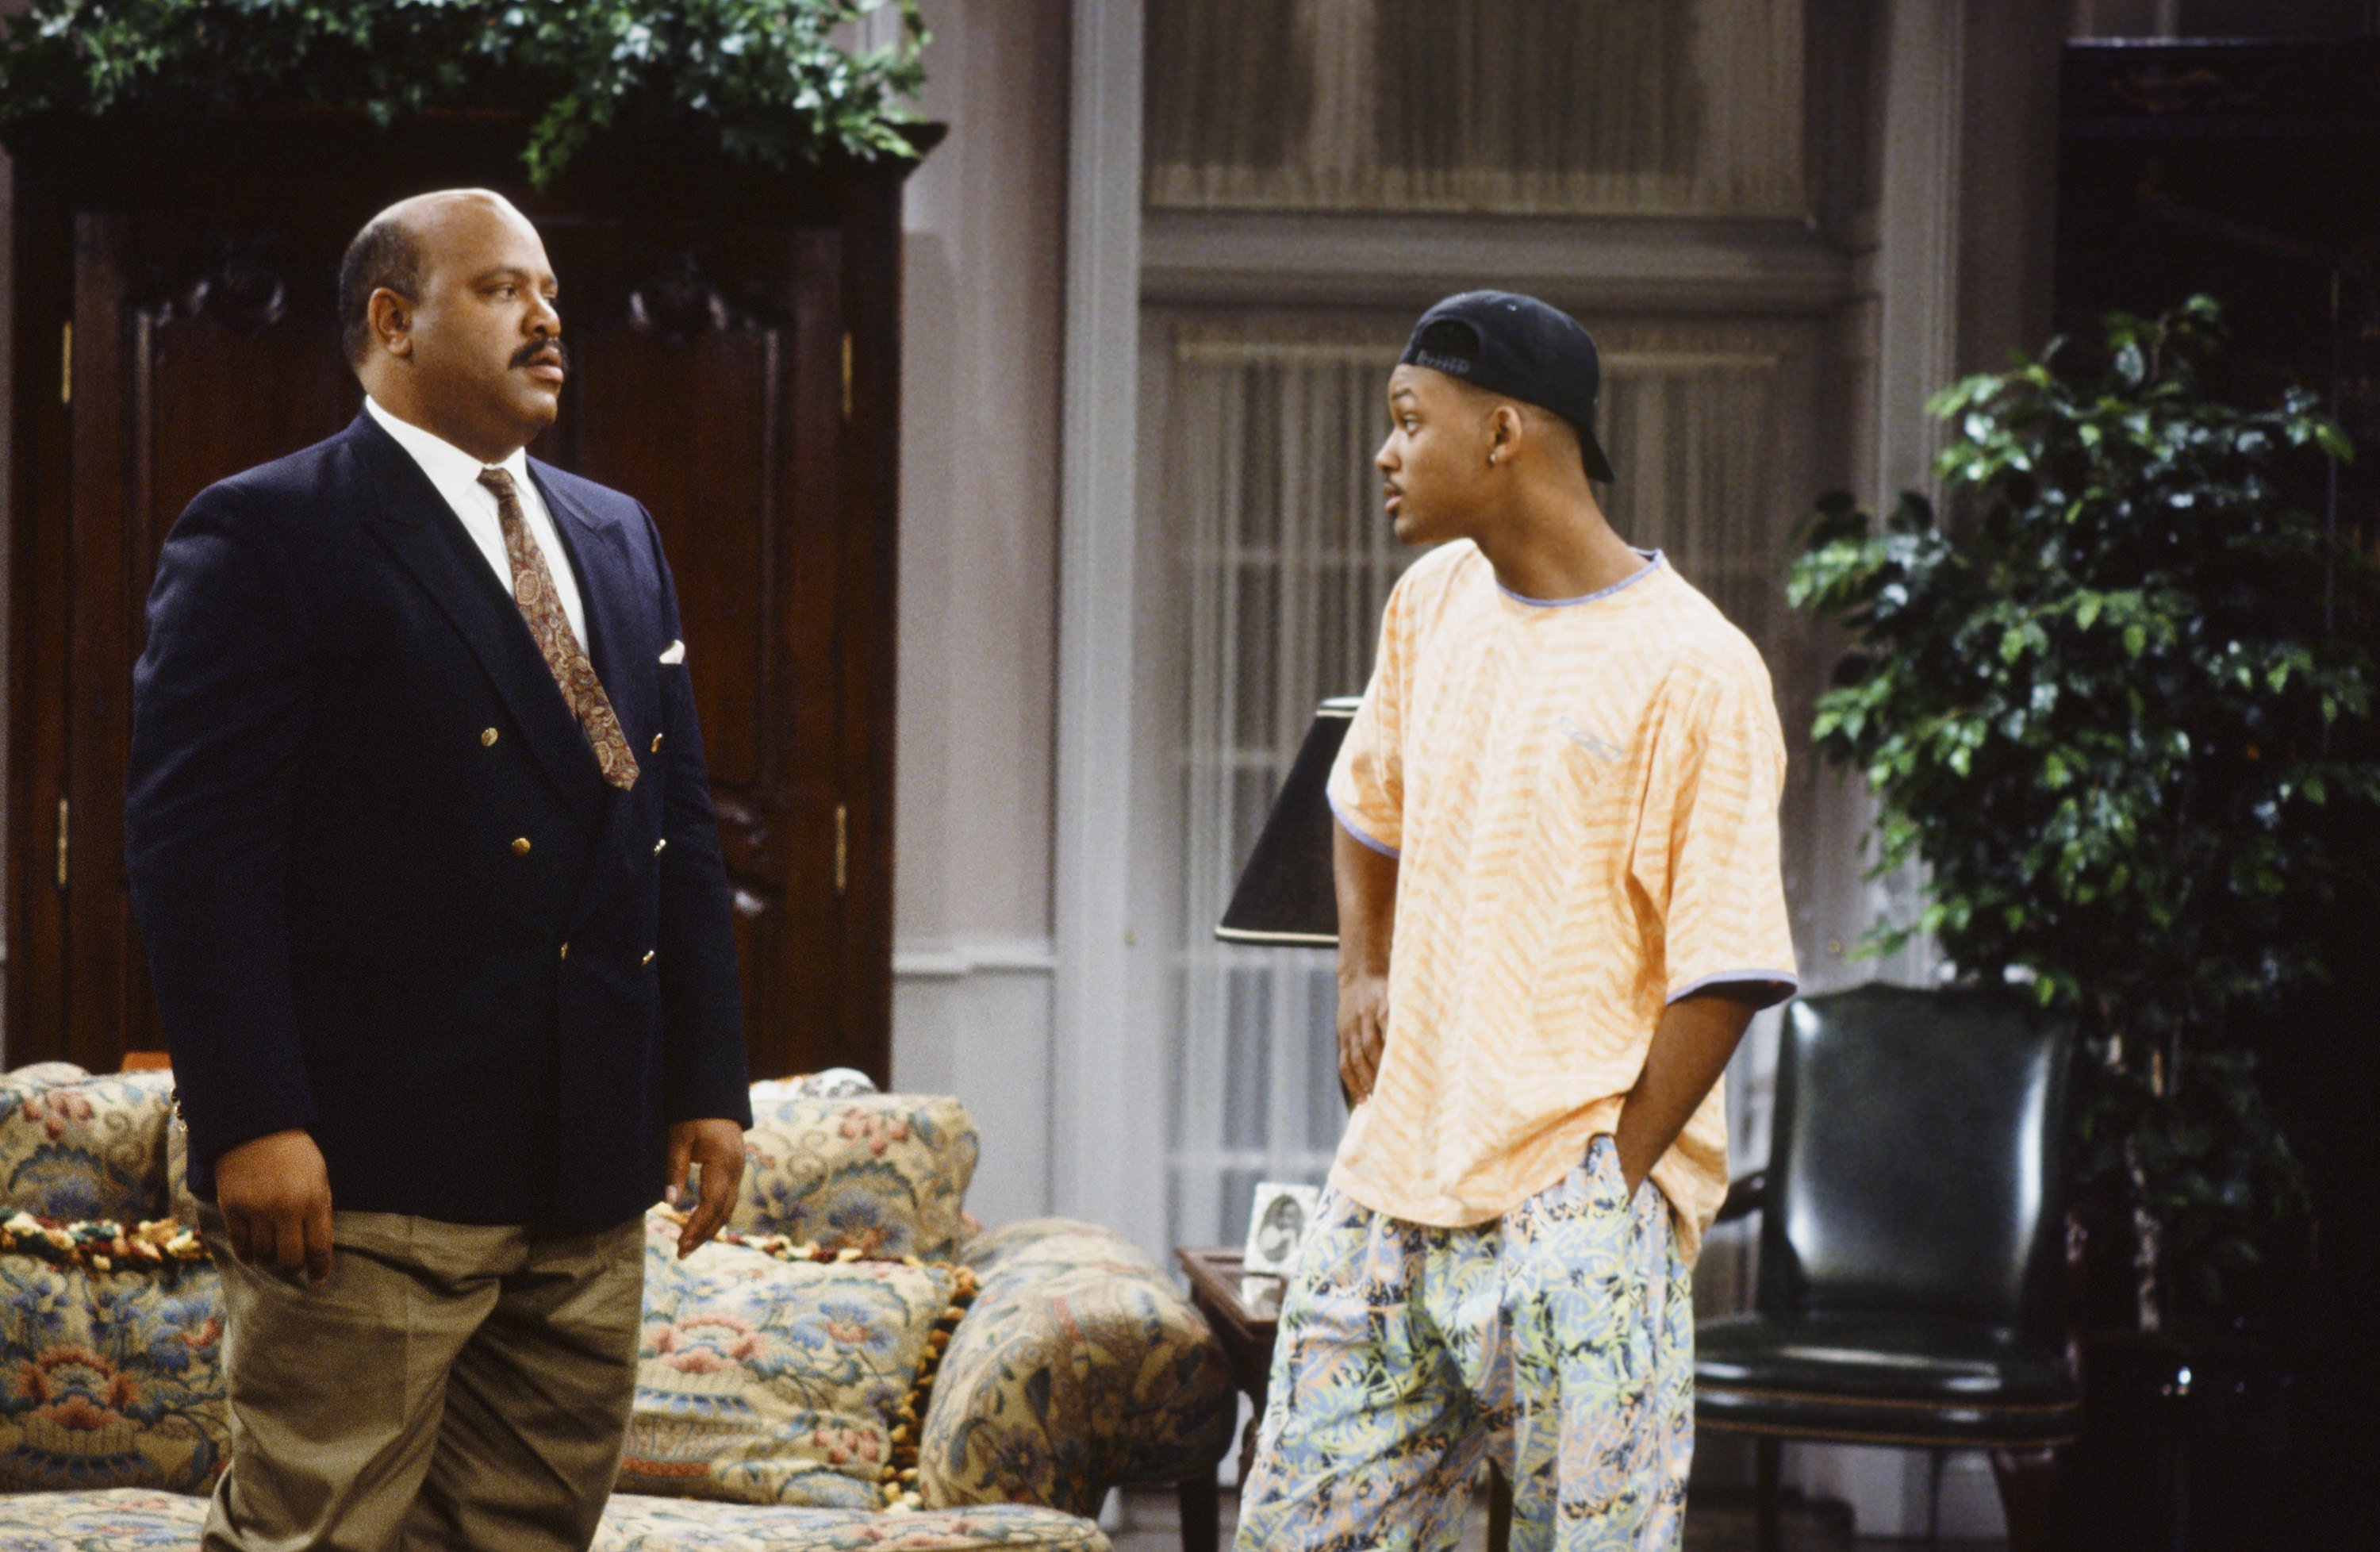 James Avery talks to Will Smith in 'The Fresh Prince of Bel-Air'